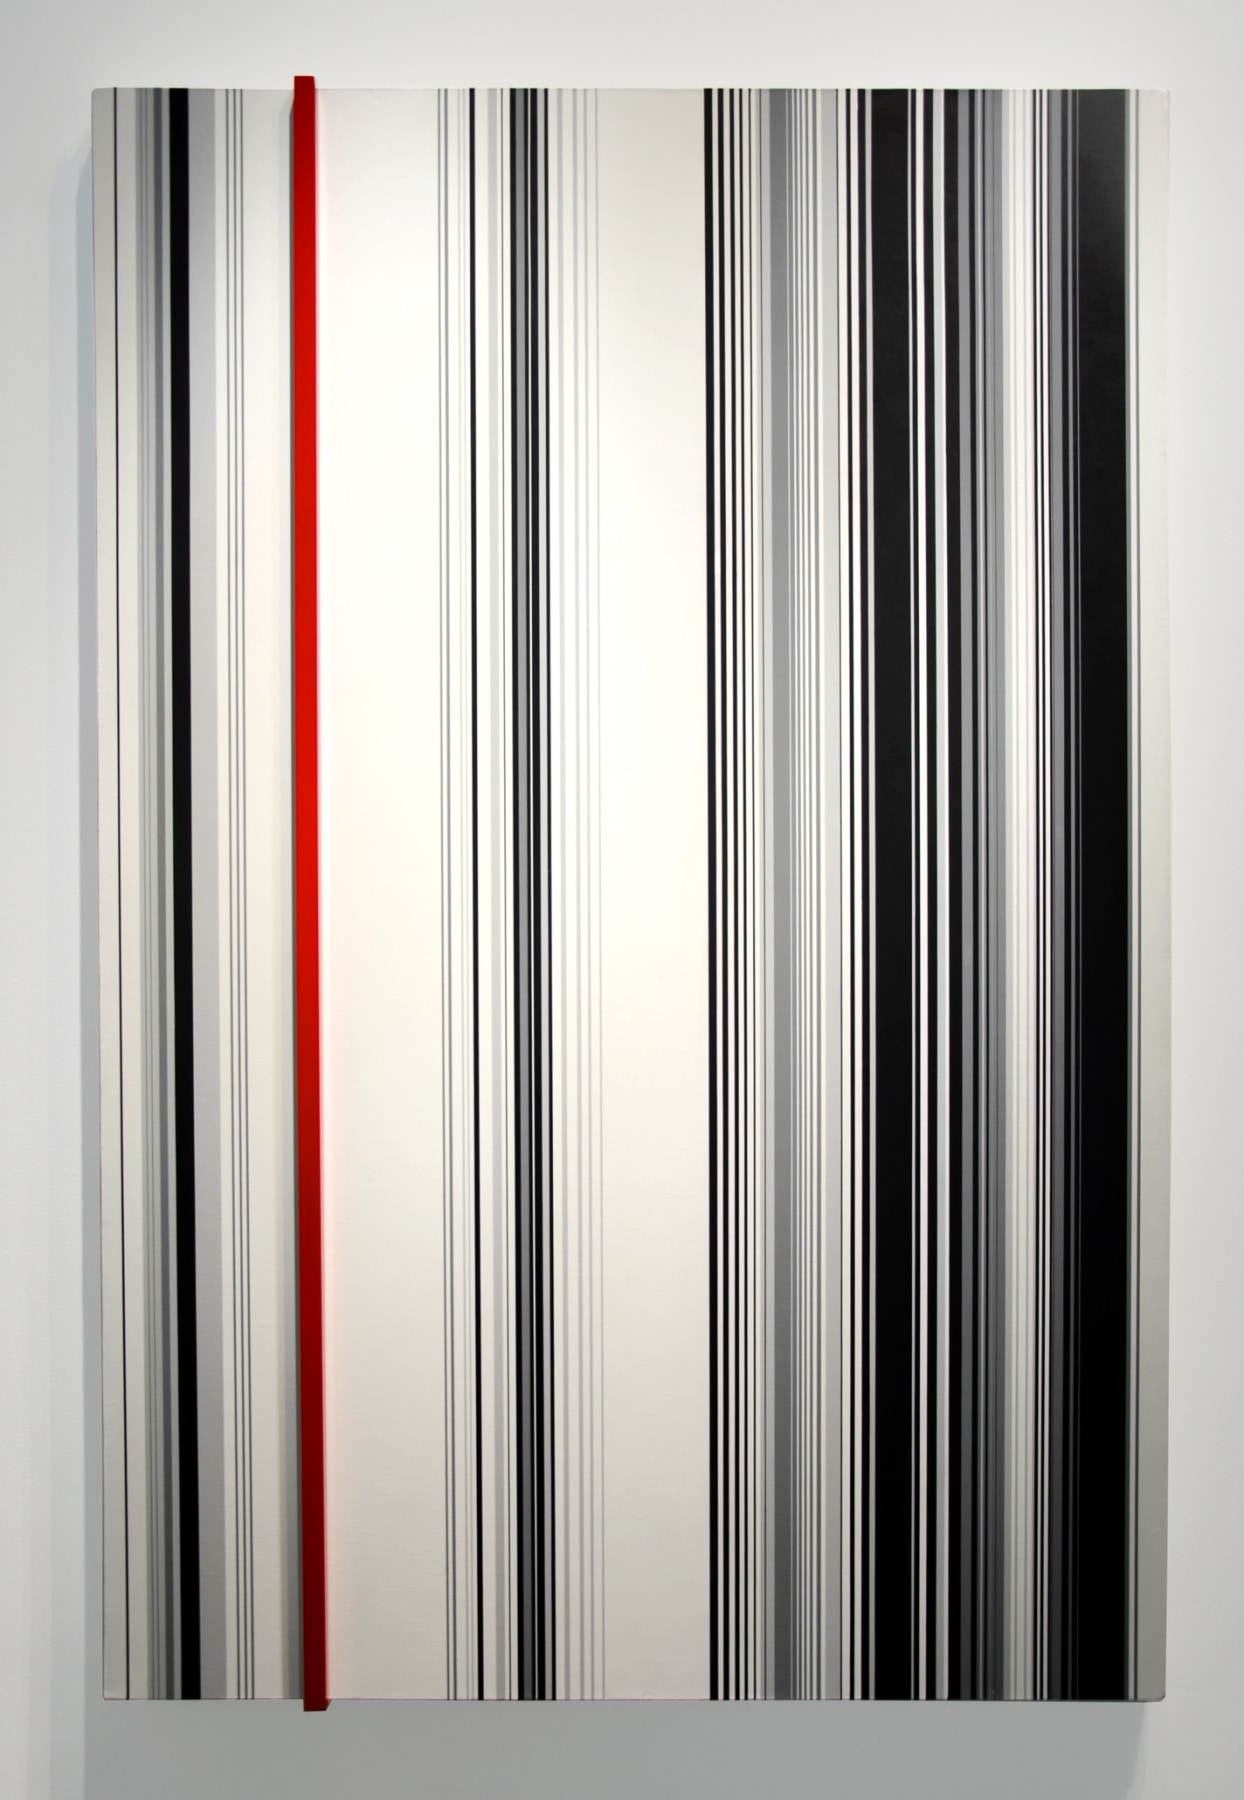 Cui_Xiuwen_Reincarnation_No13_Varnished_Aluminum_and_Acrylic_on_Canvas_100x150cm_2015